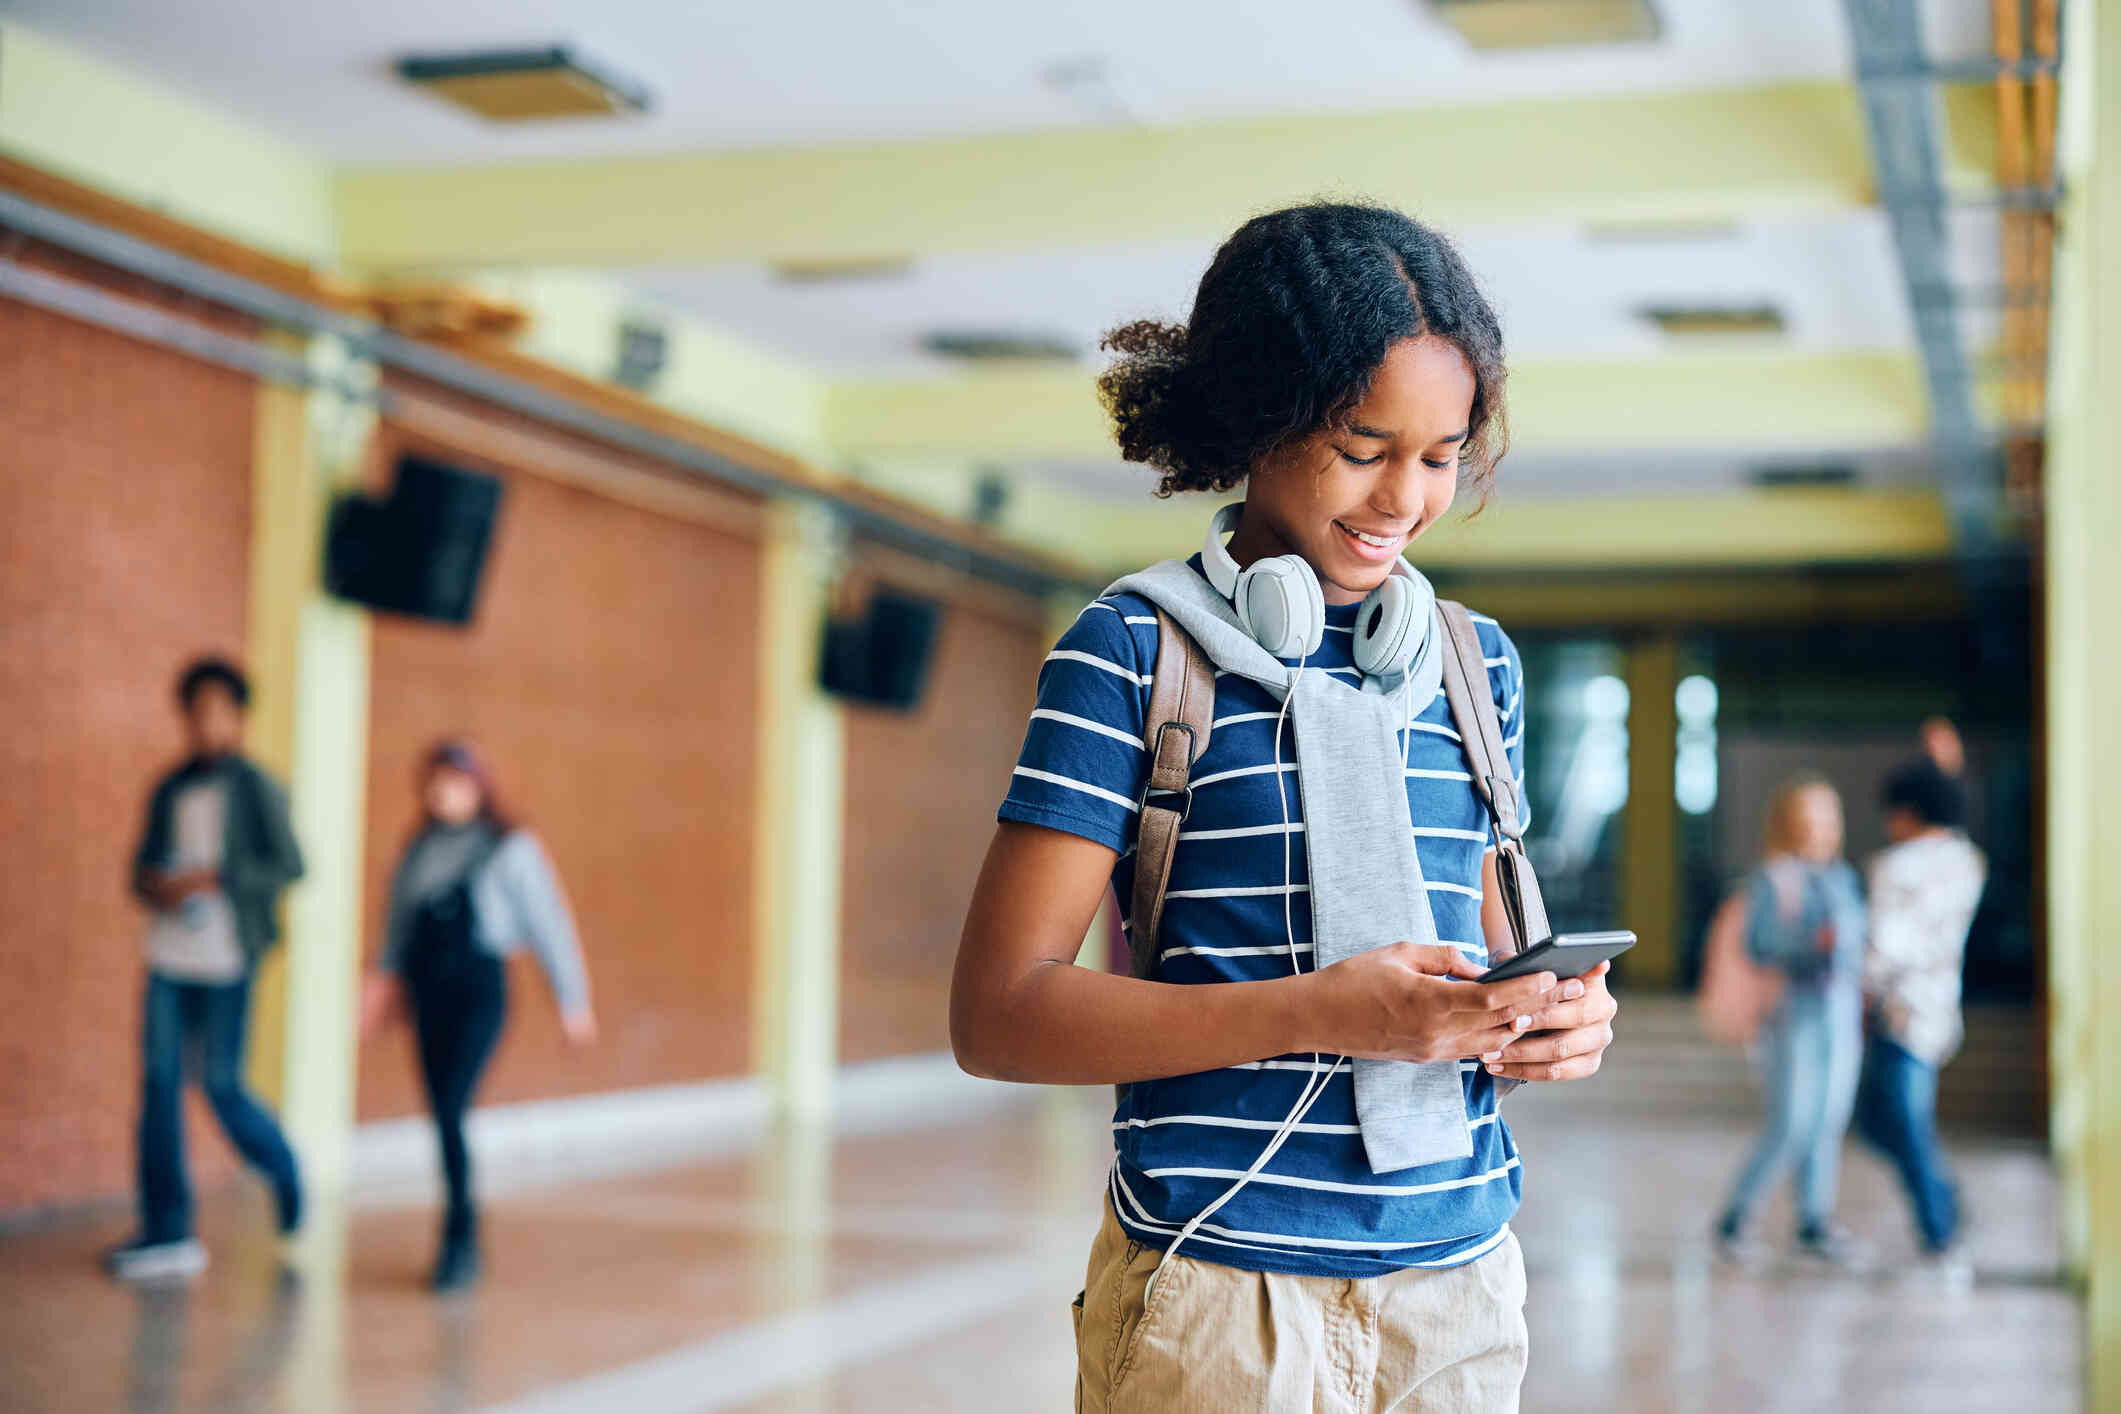 A teenage girl in a blue shirt with white headphones stands in the school hallways and looks down at the cellphone in her hand.